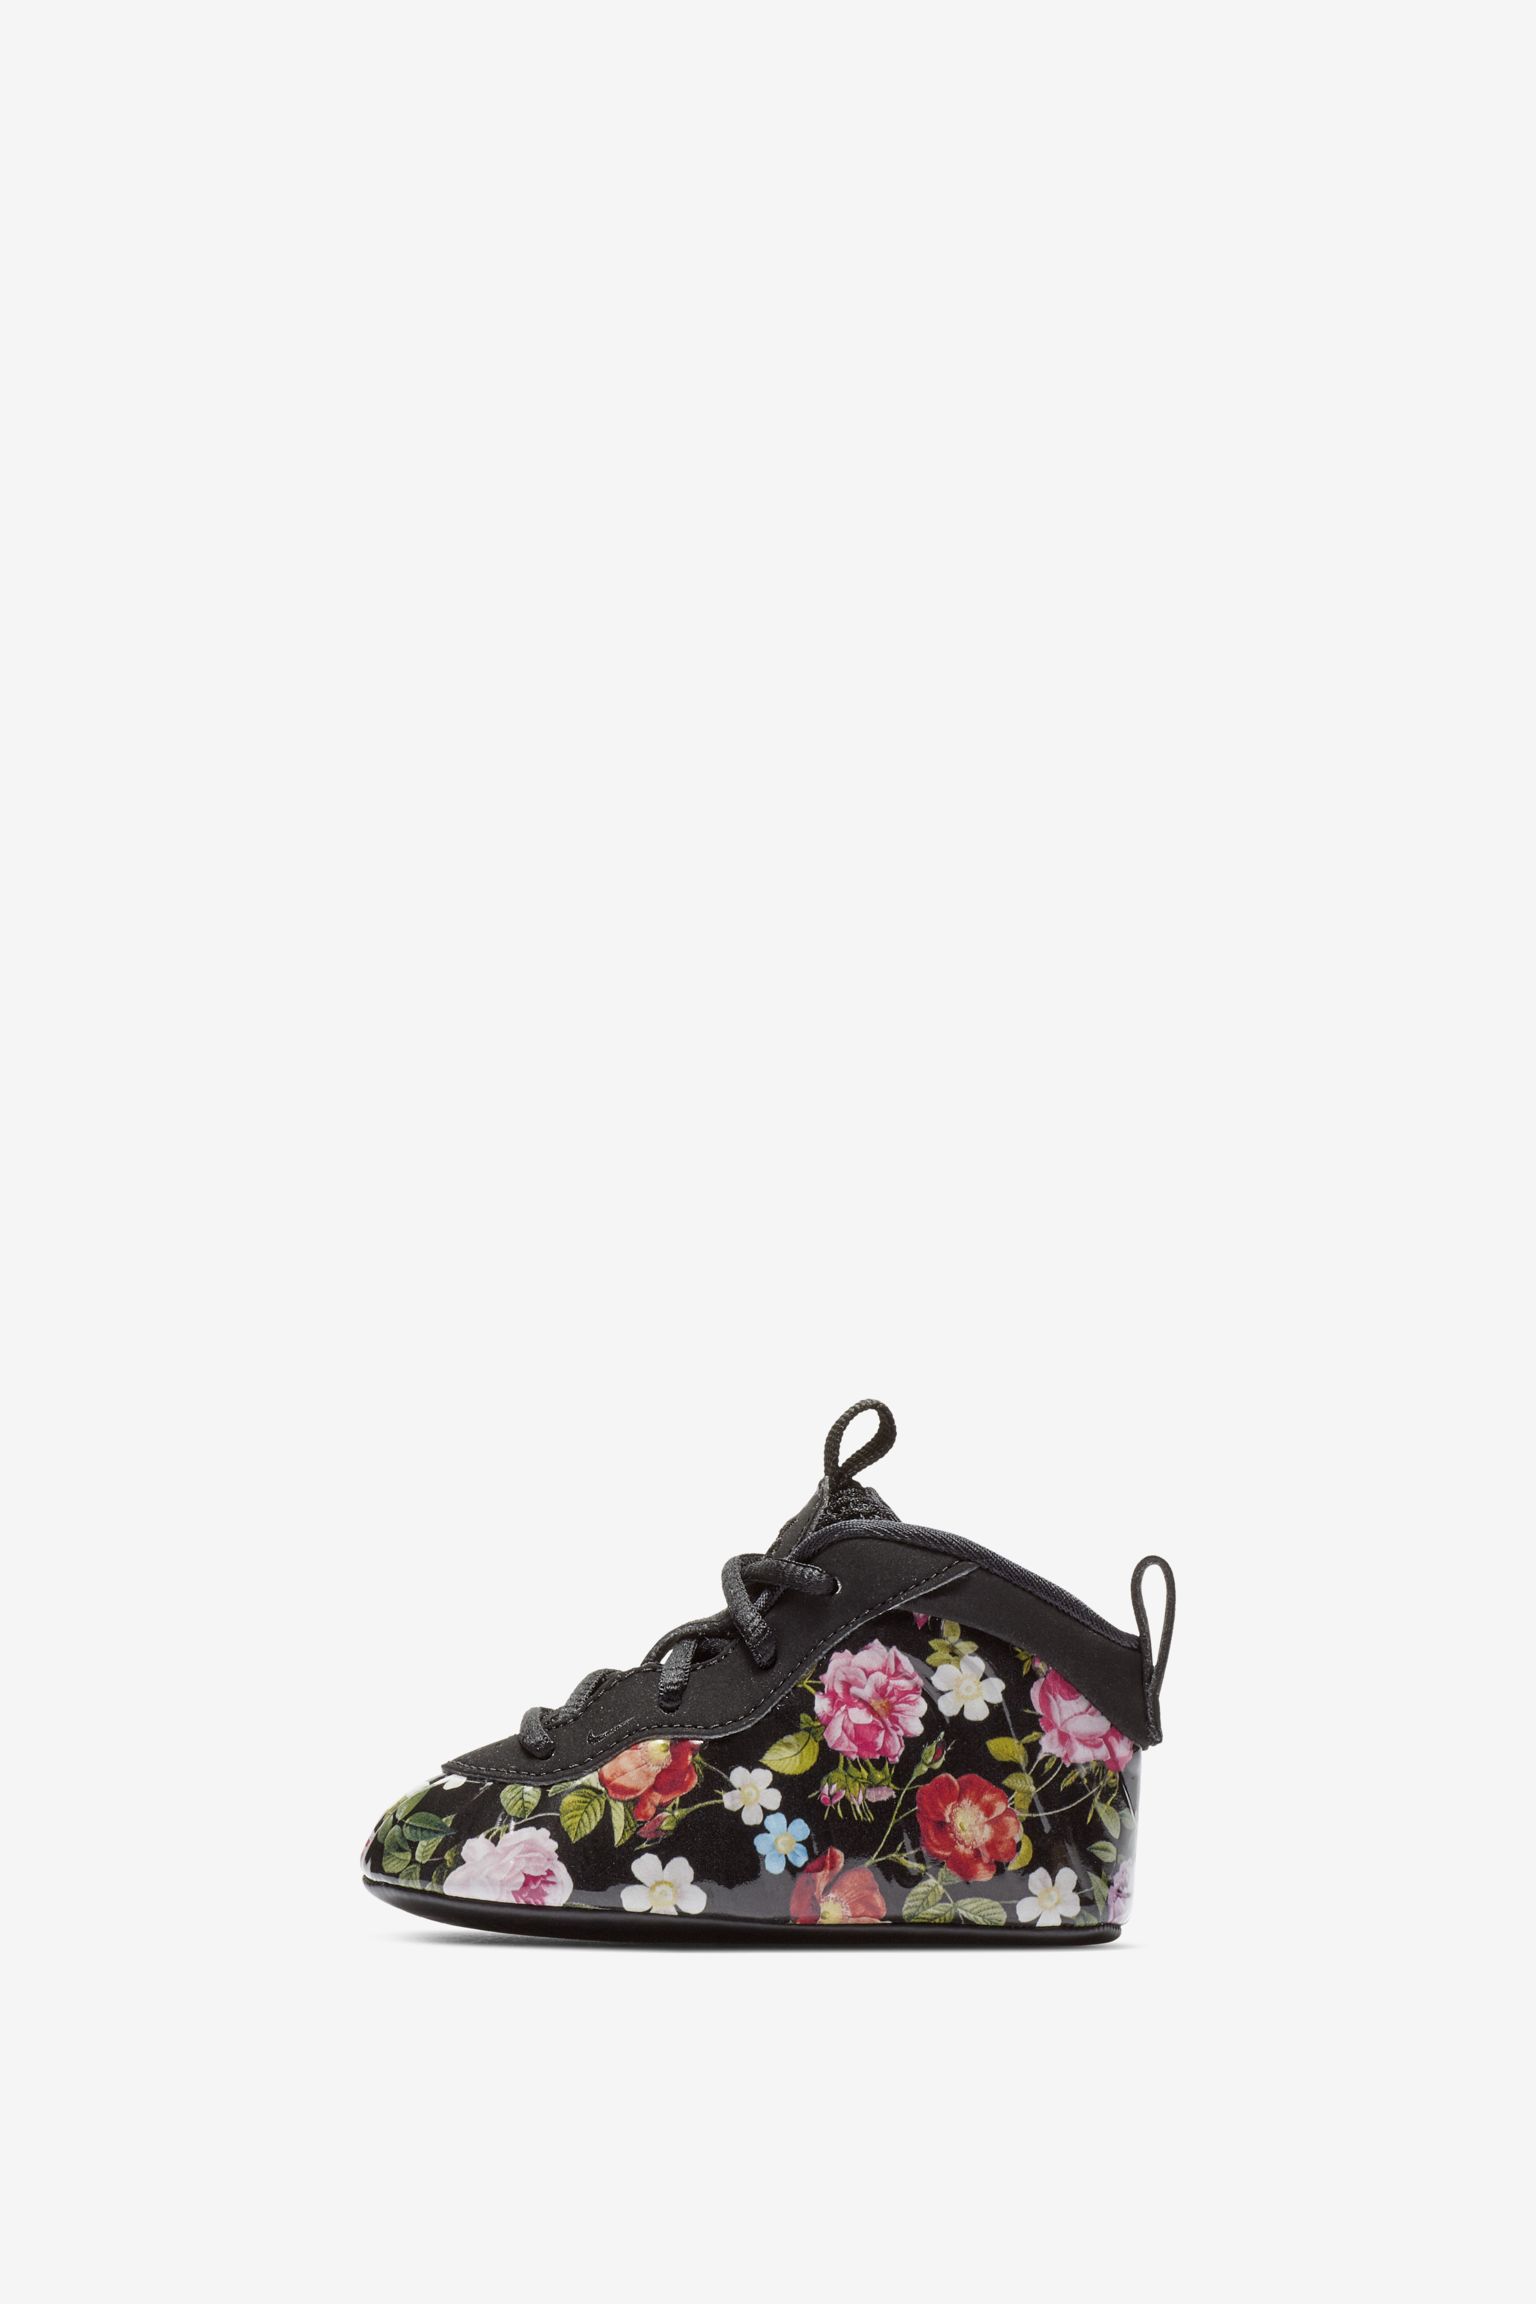 nike little posite one floral